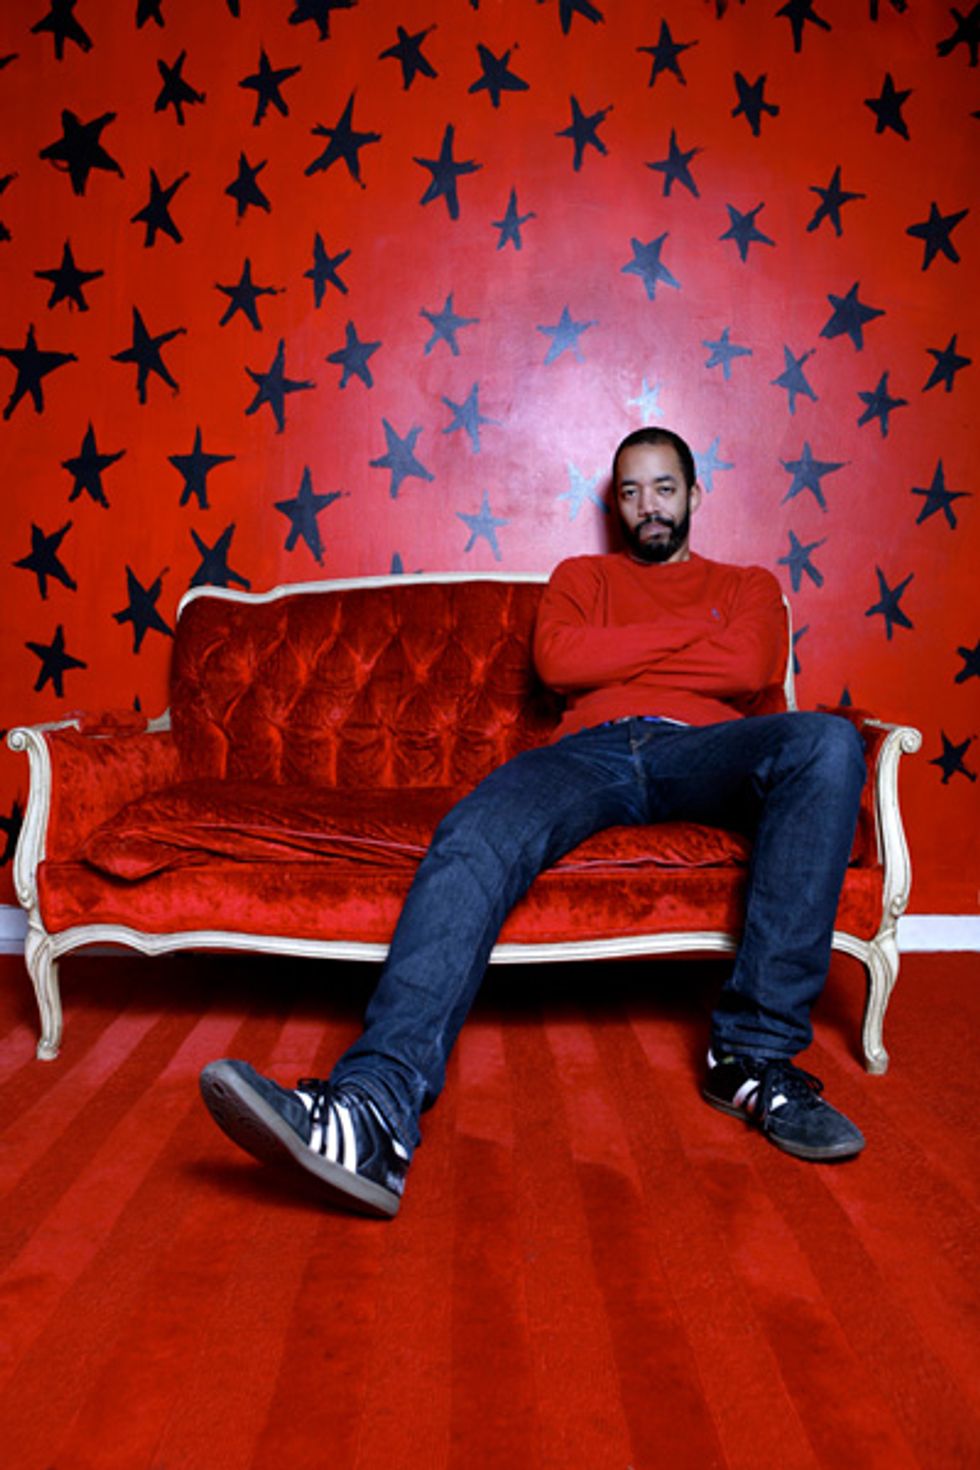 The Daily Show's Wyatt Cenac On Hurricane Irene, Being Too Old For MTV, and Lack Of Twitter Account